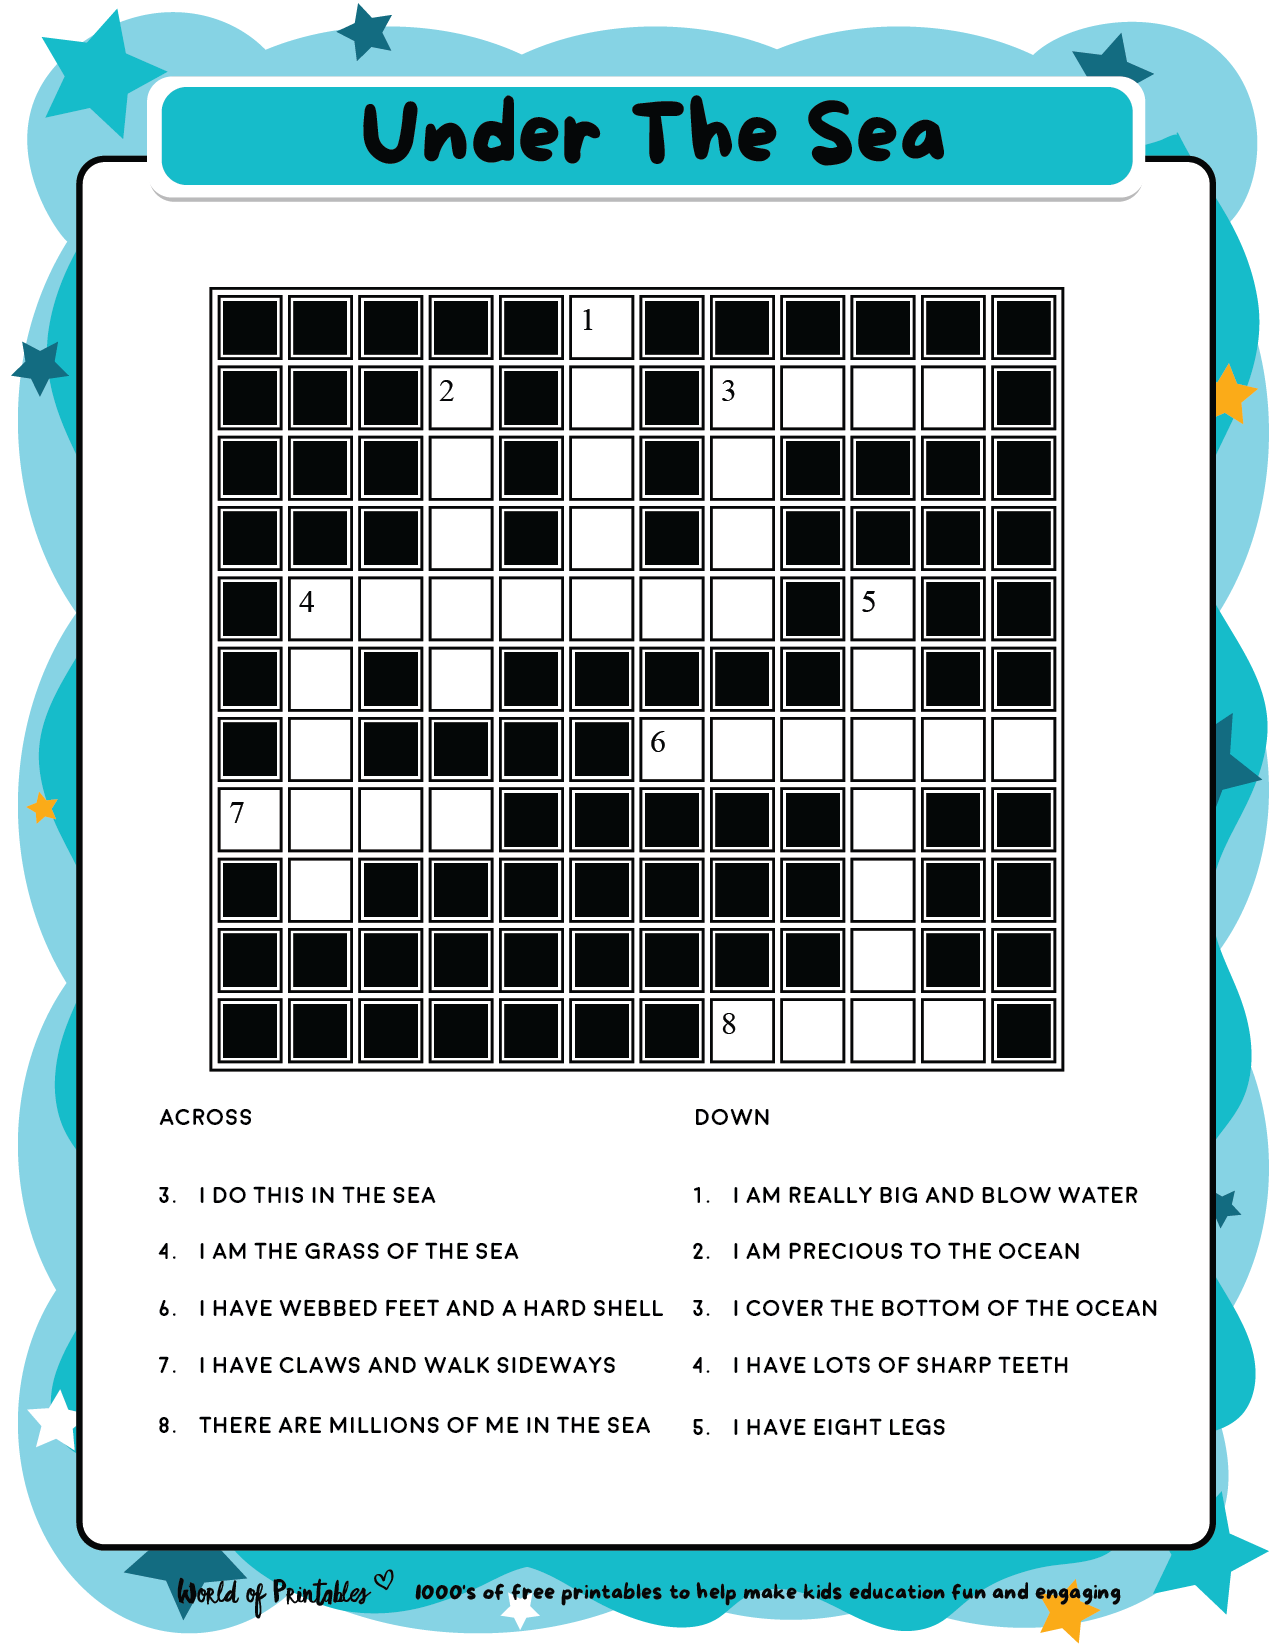 ayhan tunc recommends blow it crossword clue pic